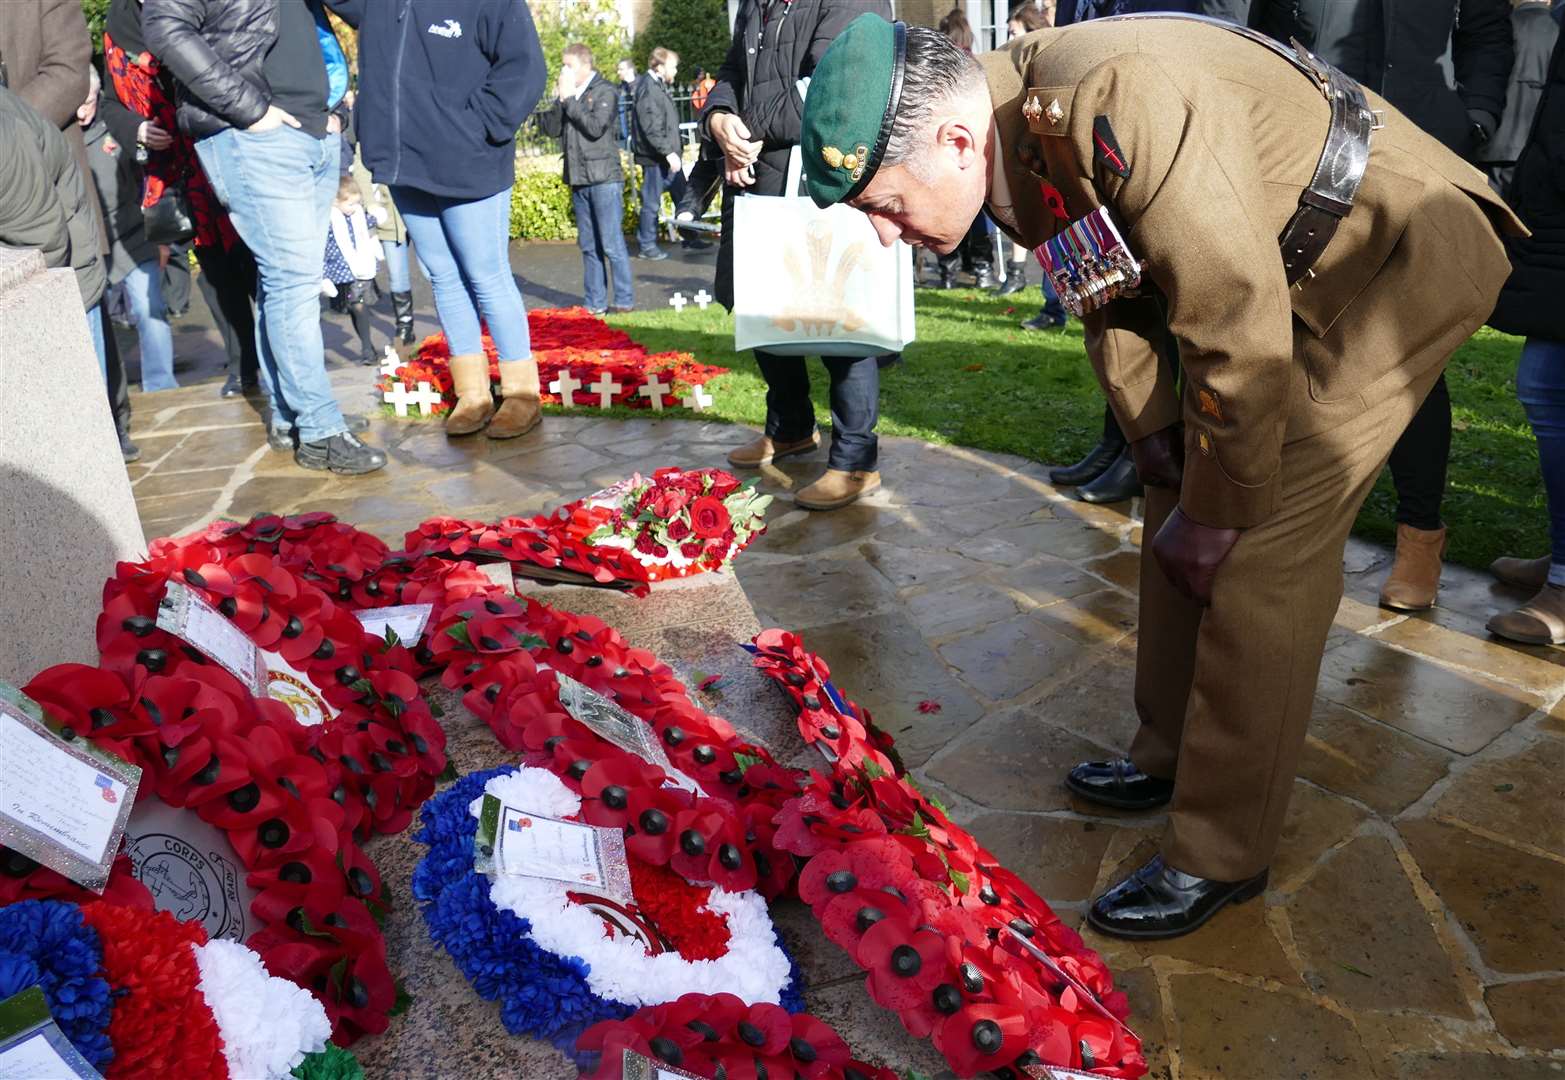 Thousands of people will turn out to pay their respects to the fallen